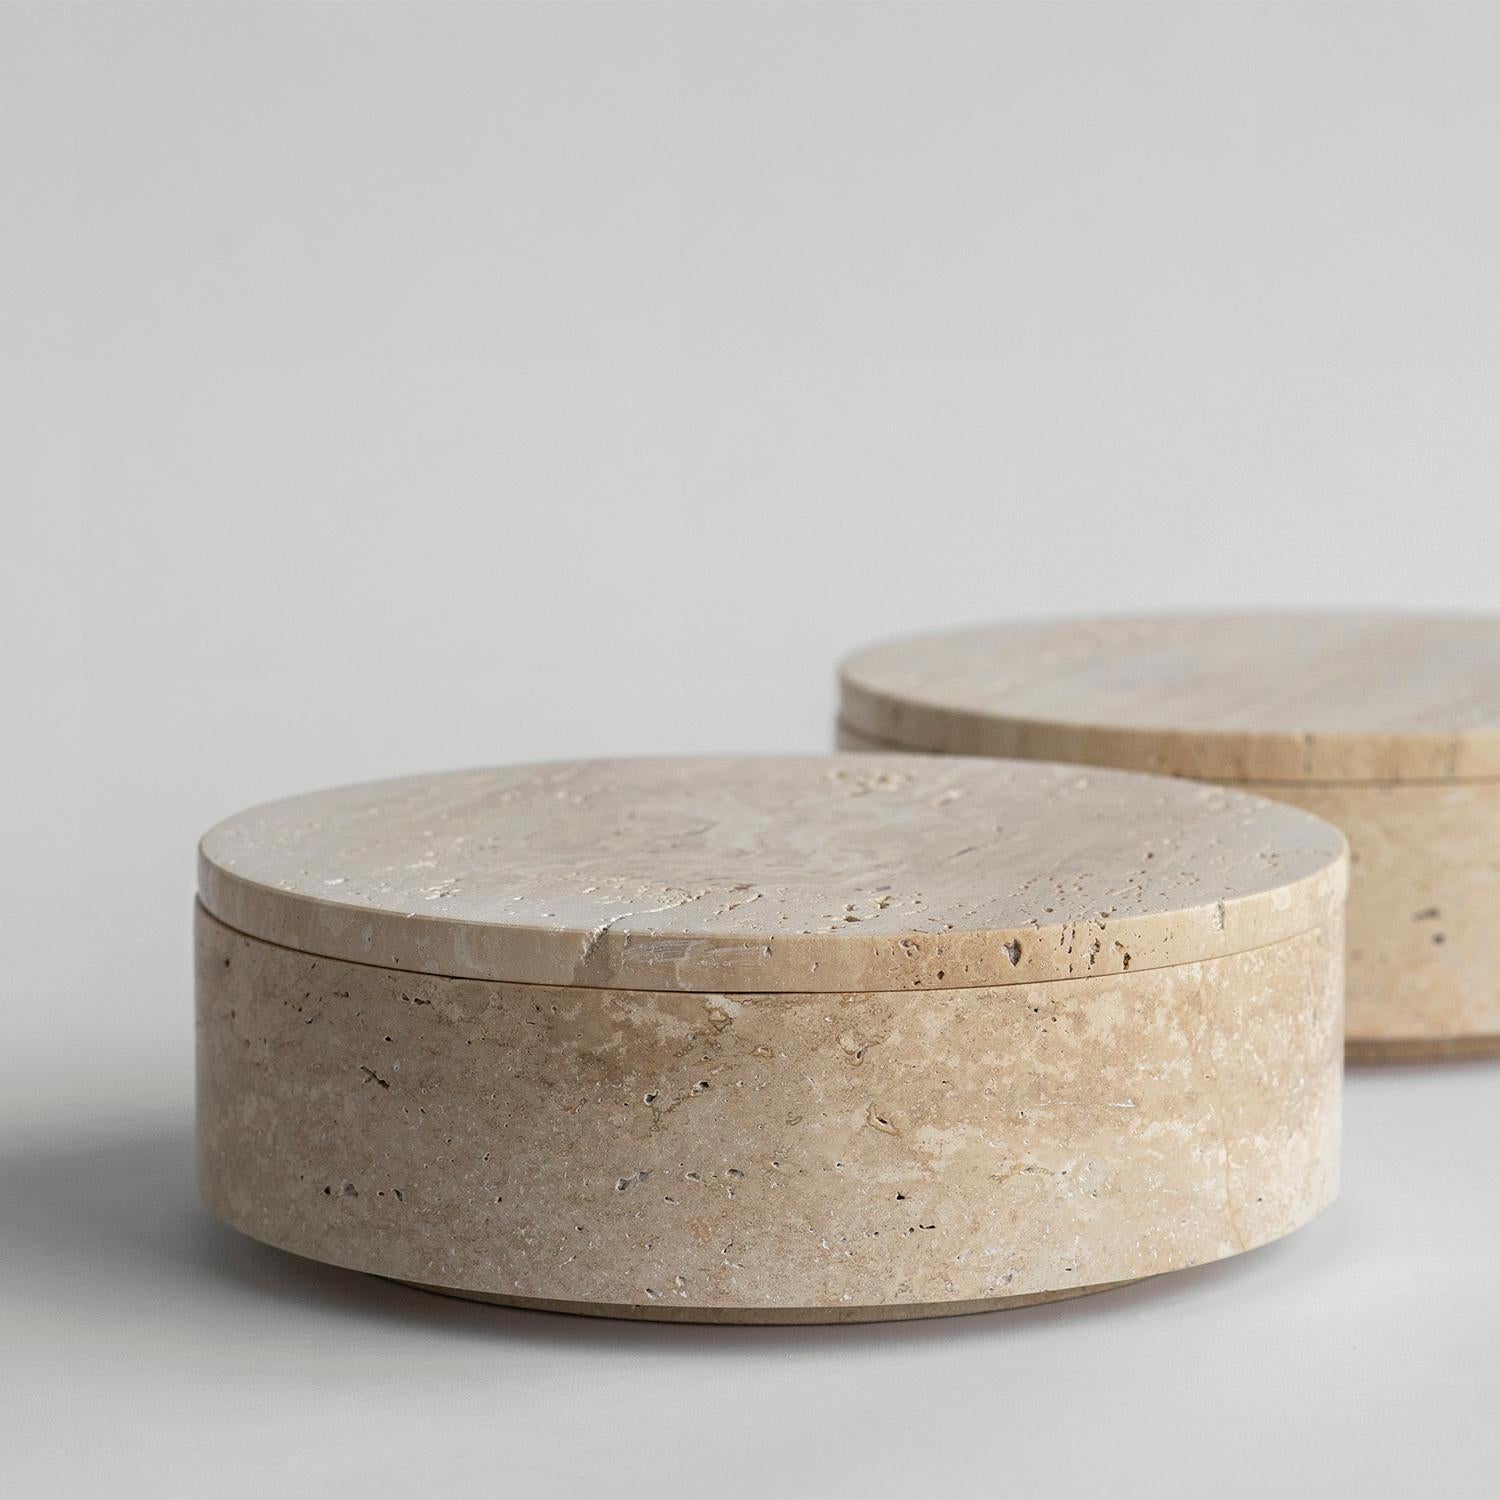 Stunning, aesthetic, timeless are words that can be used to describe this elegant and modern travertine bowl from Kiwano. Expertly crafted and finished by hand, our travertine vases are a study in sculptural simplicity. Natural variations in the